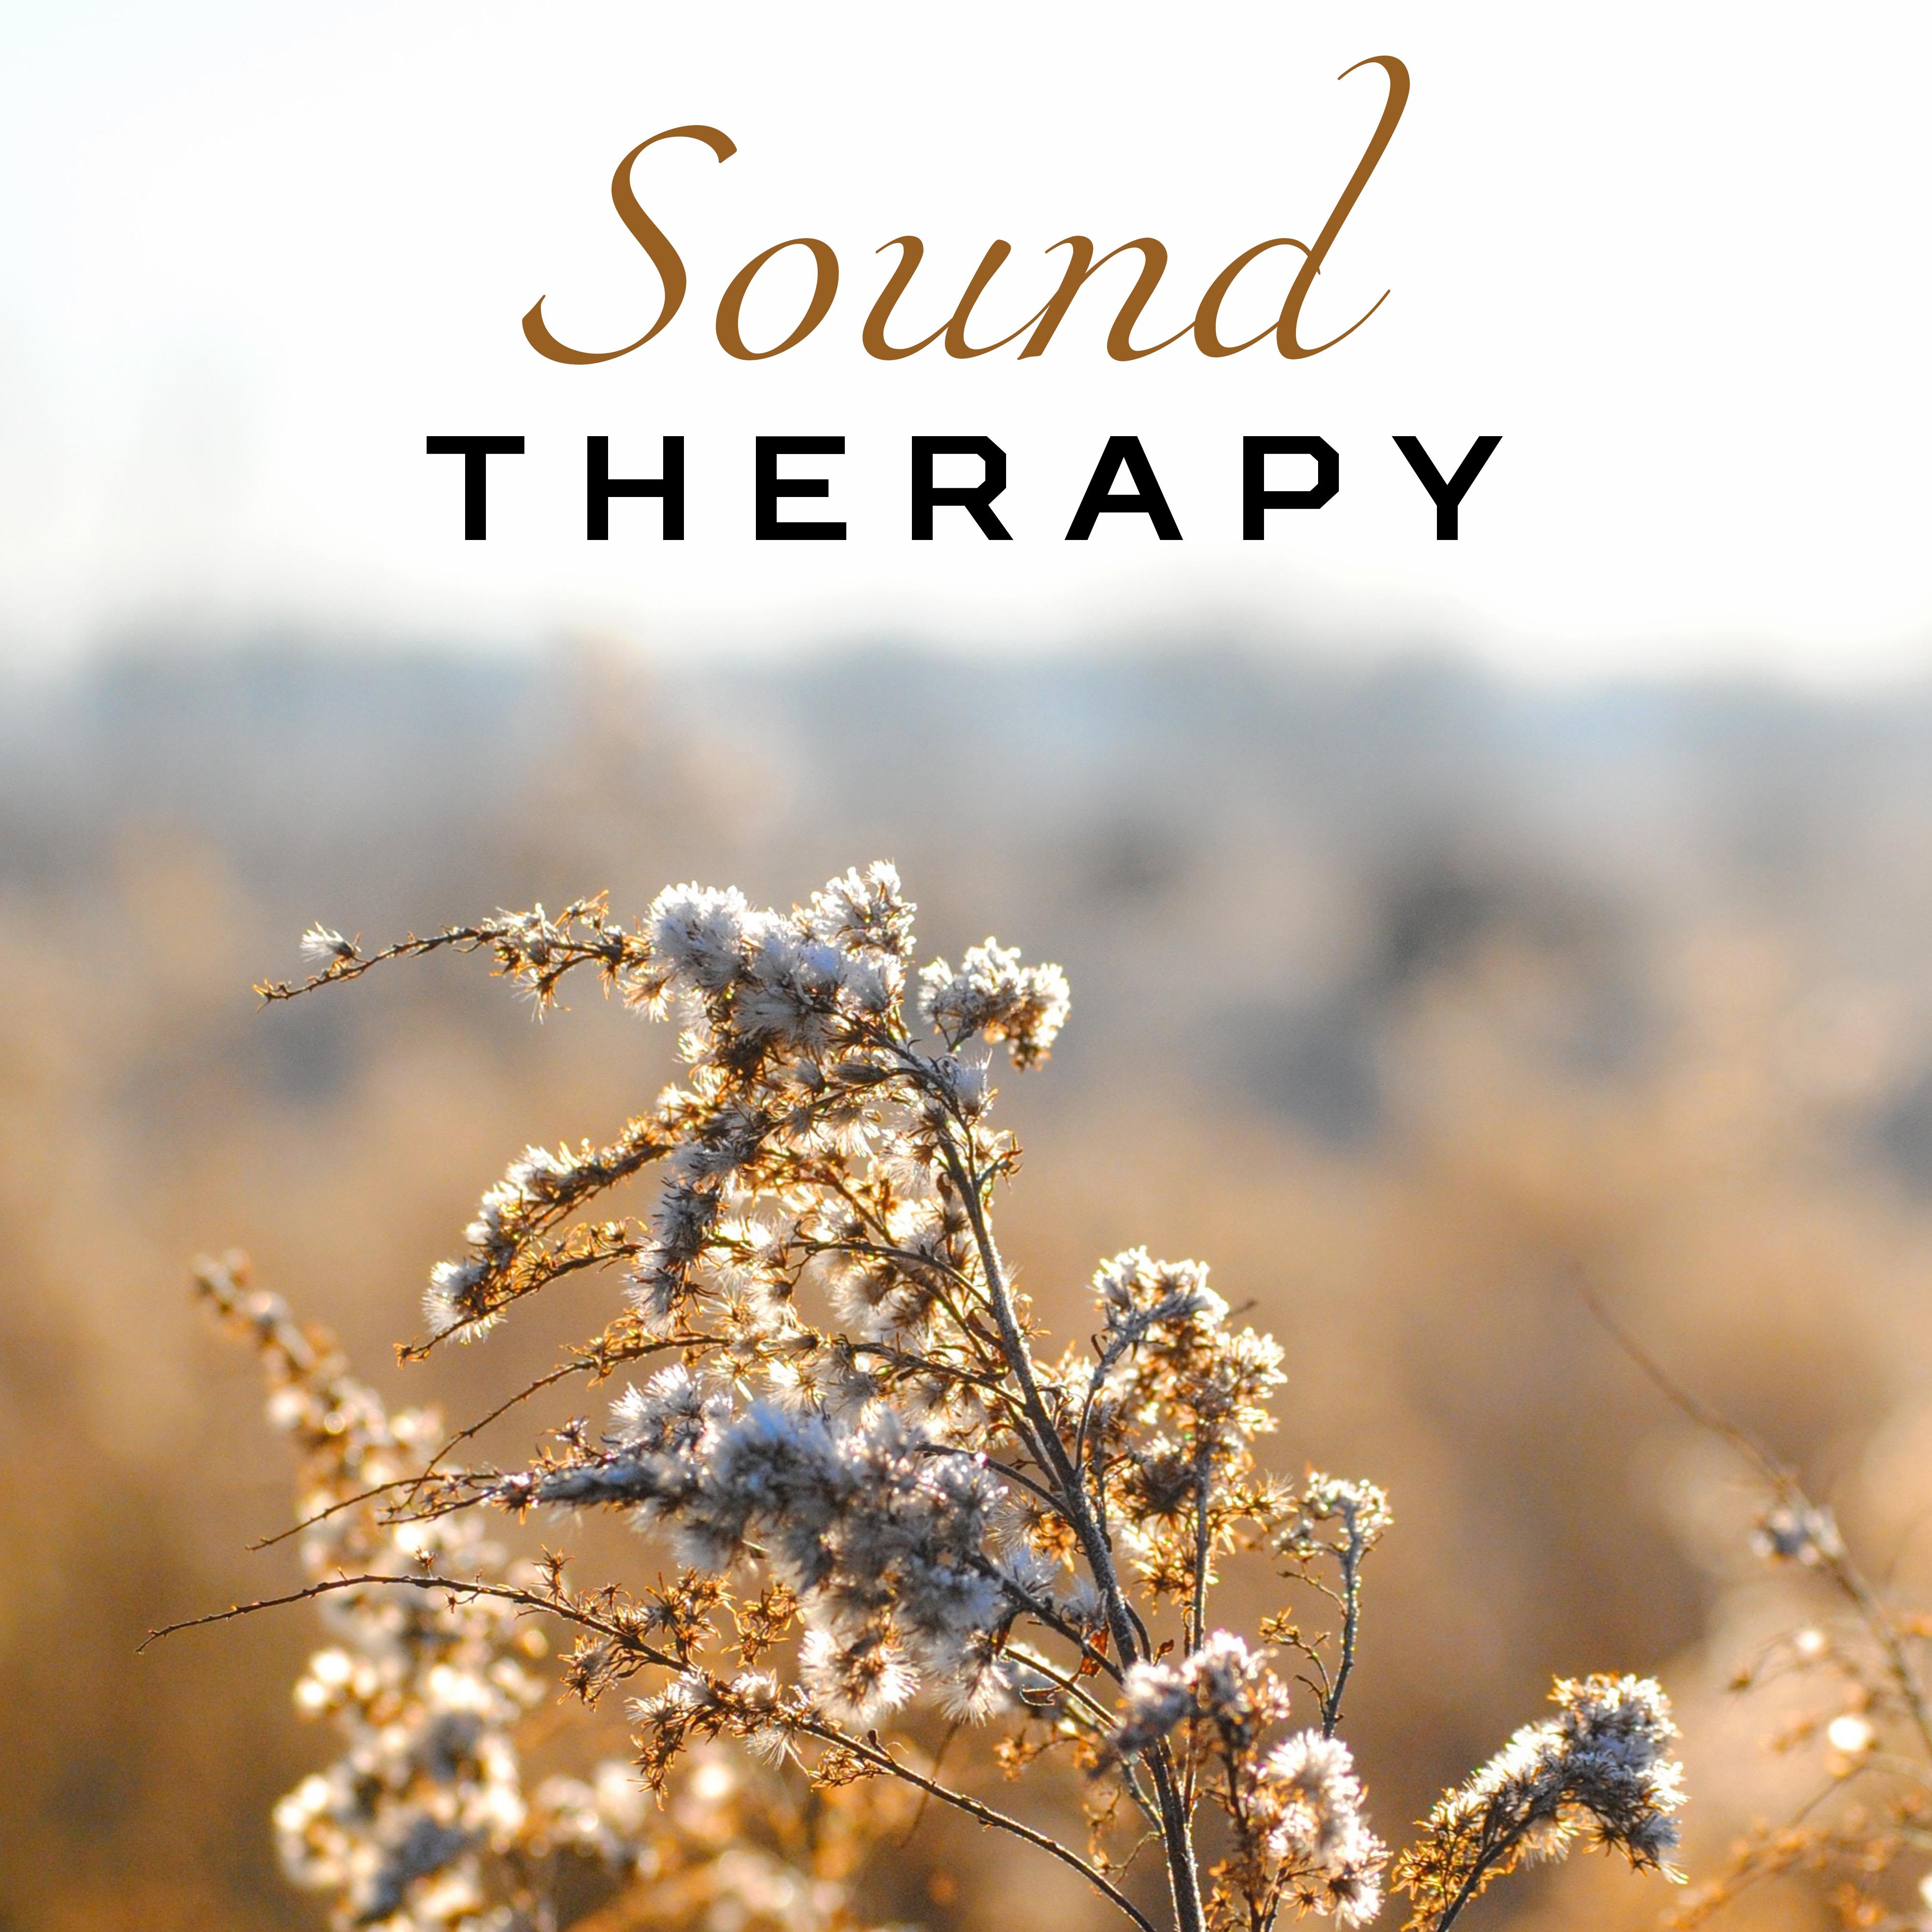 Sound Therapy  Soothing Music, Water Reduces Stress, Peaceful Mind, Meditate, Nature Sounds